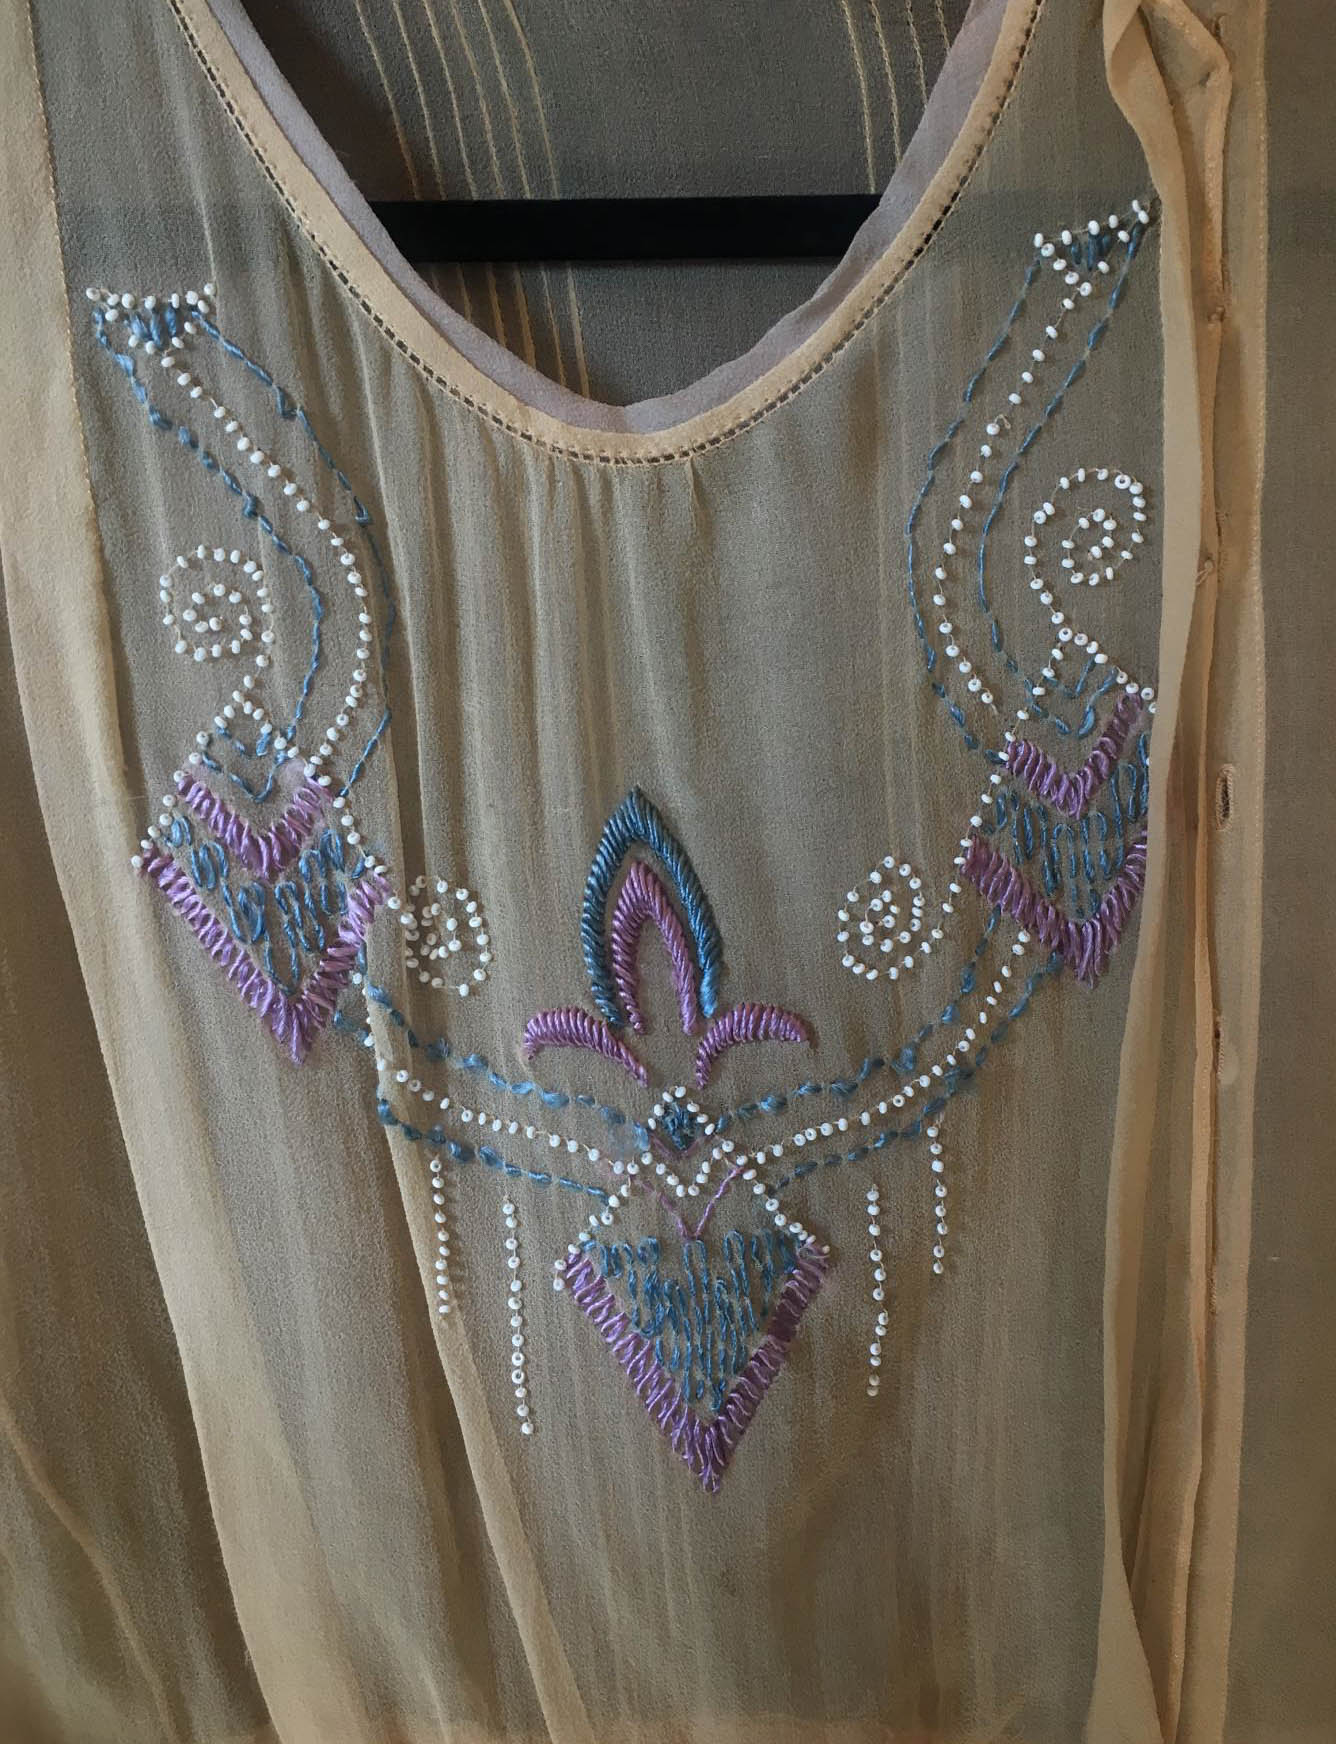 Women's Vintage Edwardian Sheer Embroidered Beaded Blouse - Small